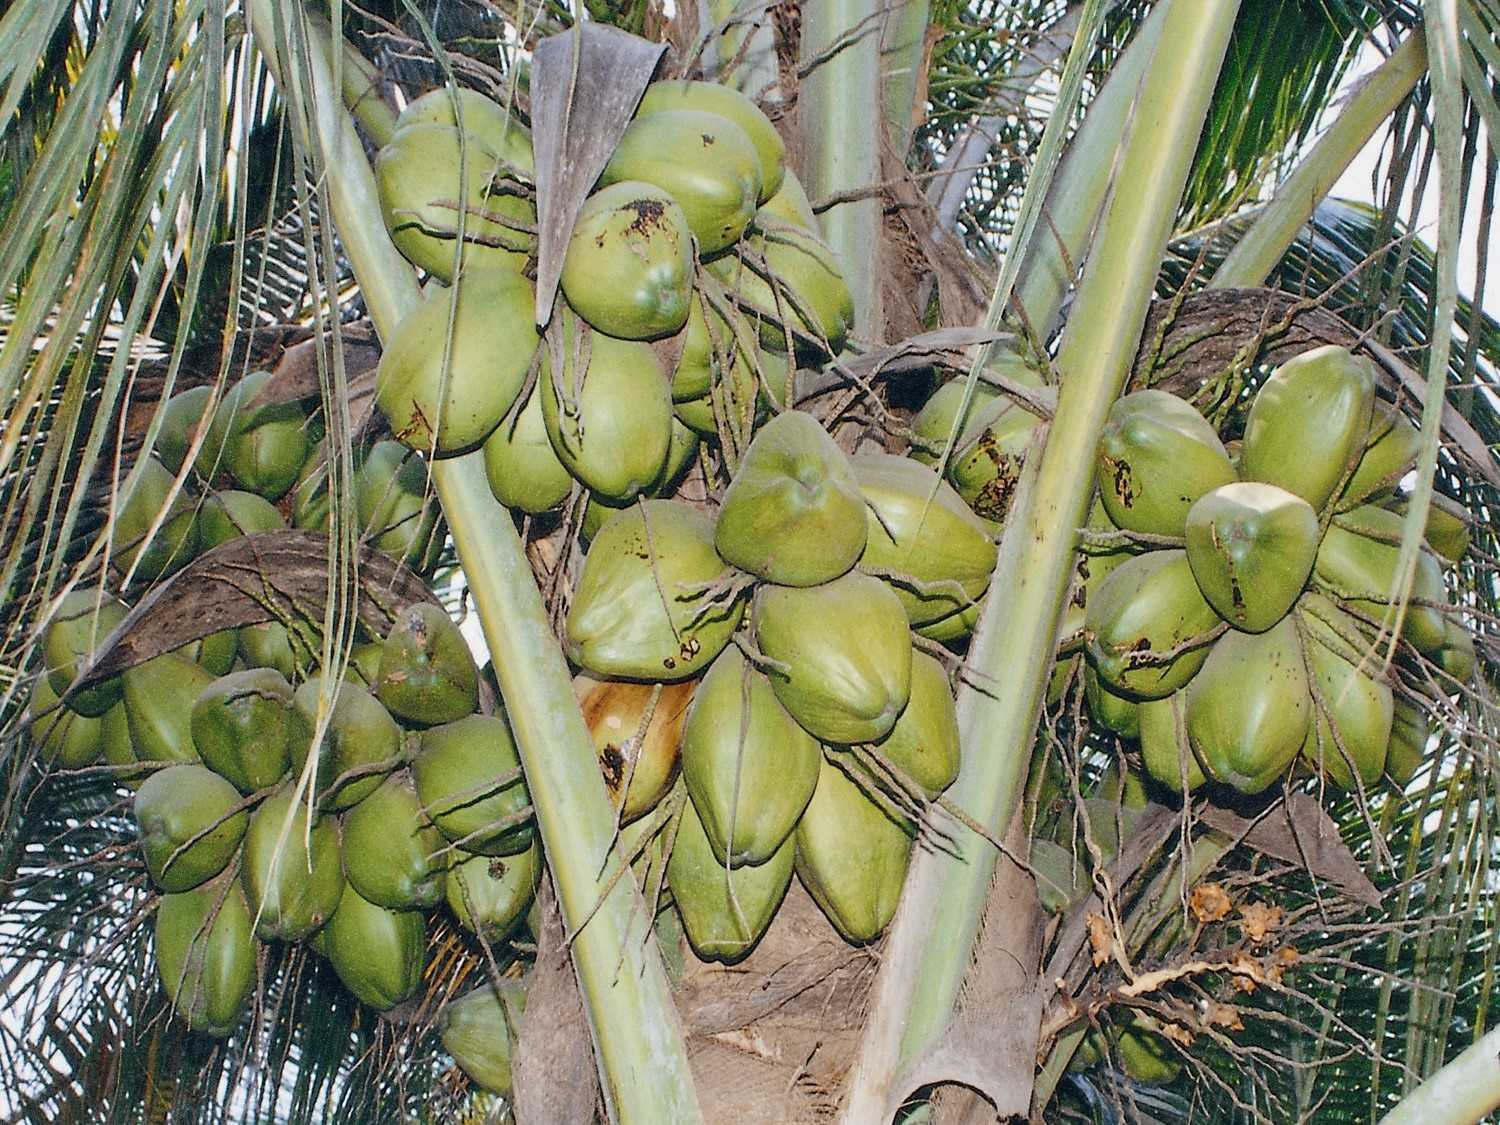 Coconut Production in three years from Waste Land